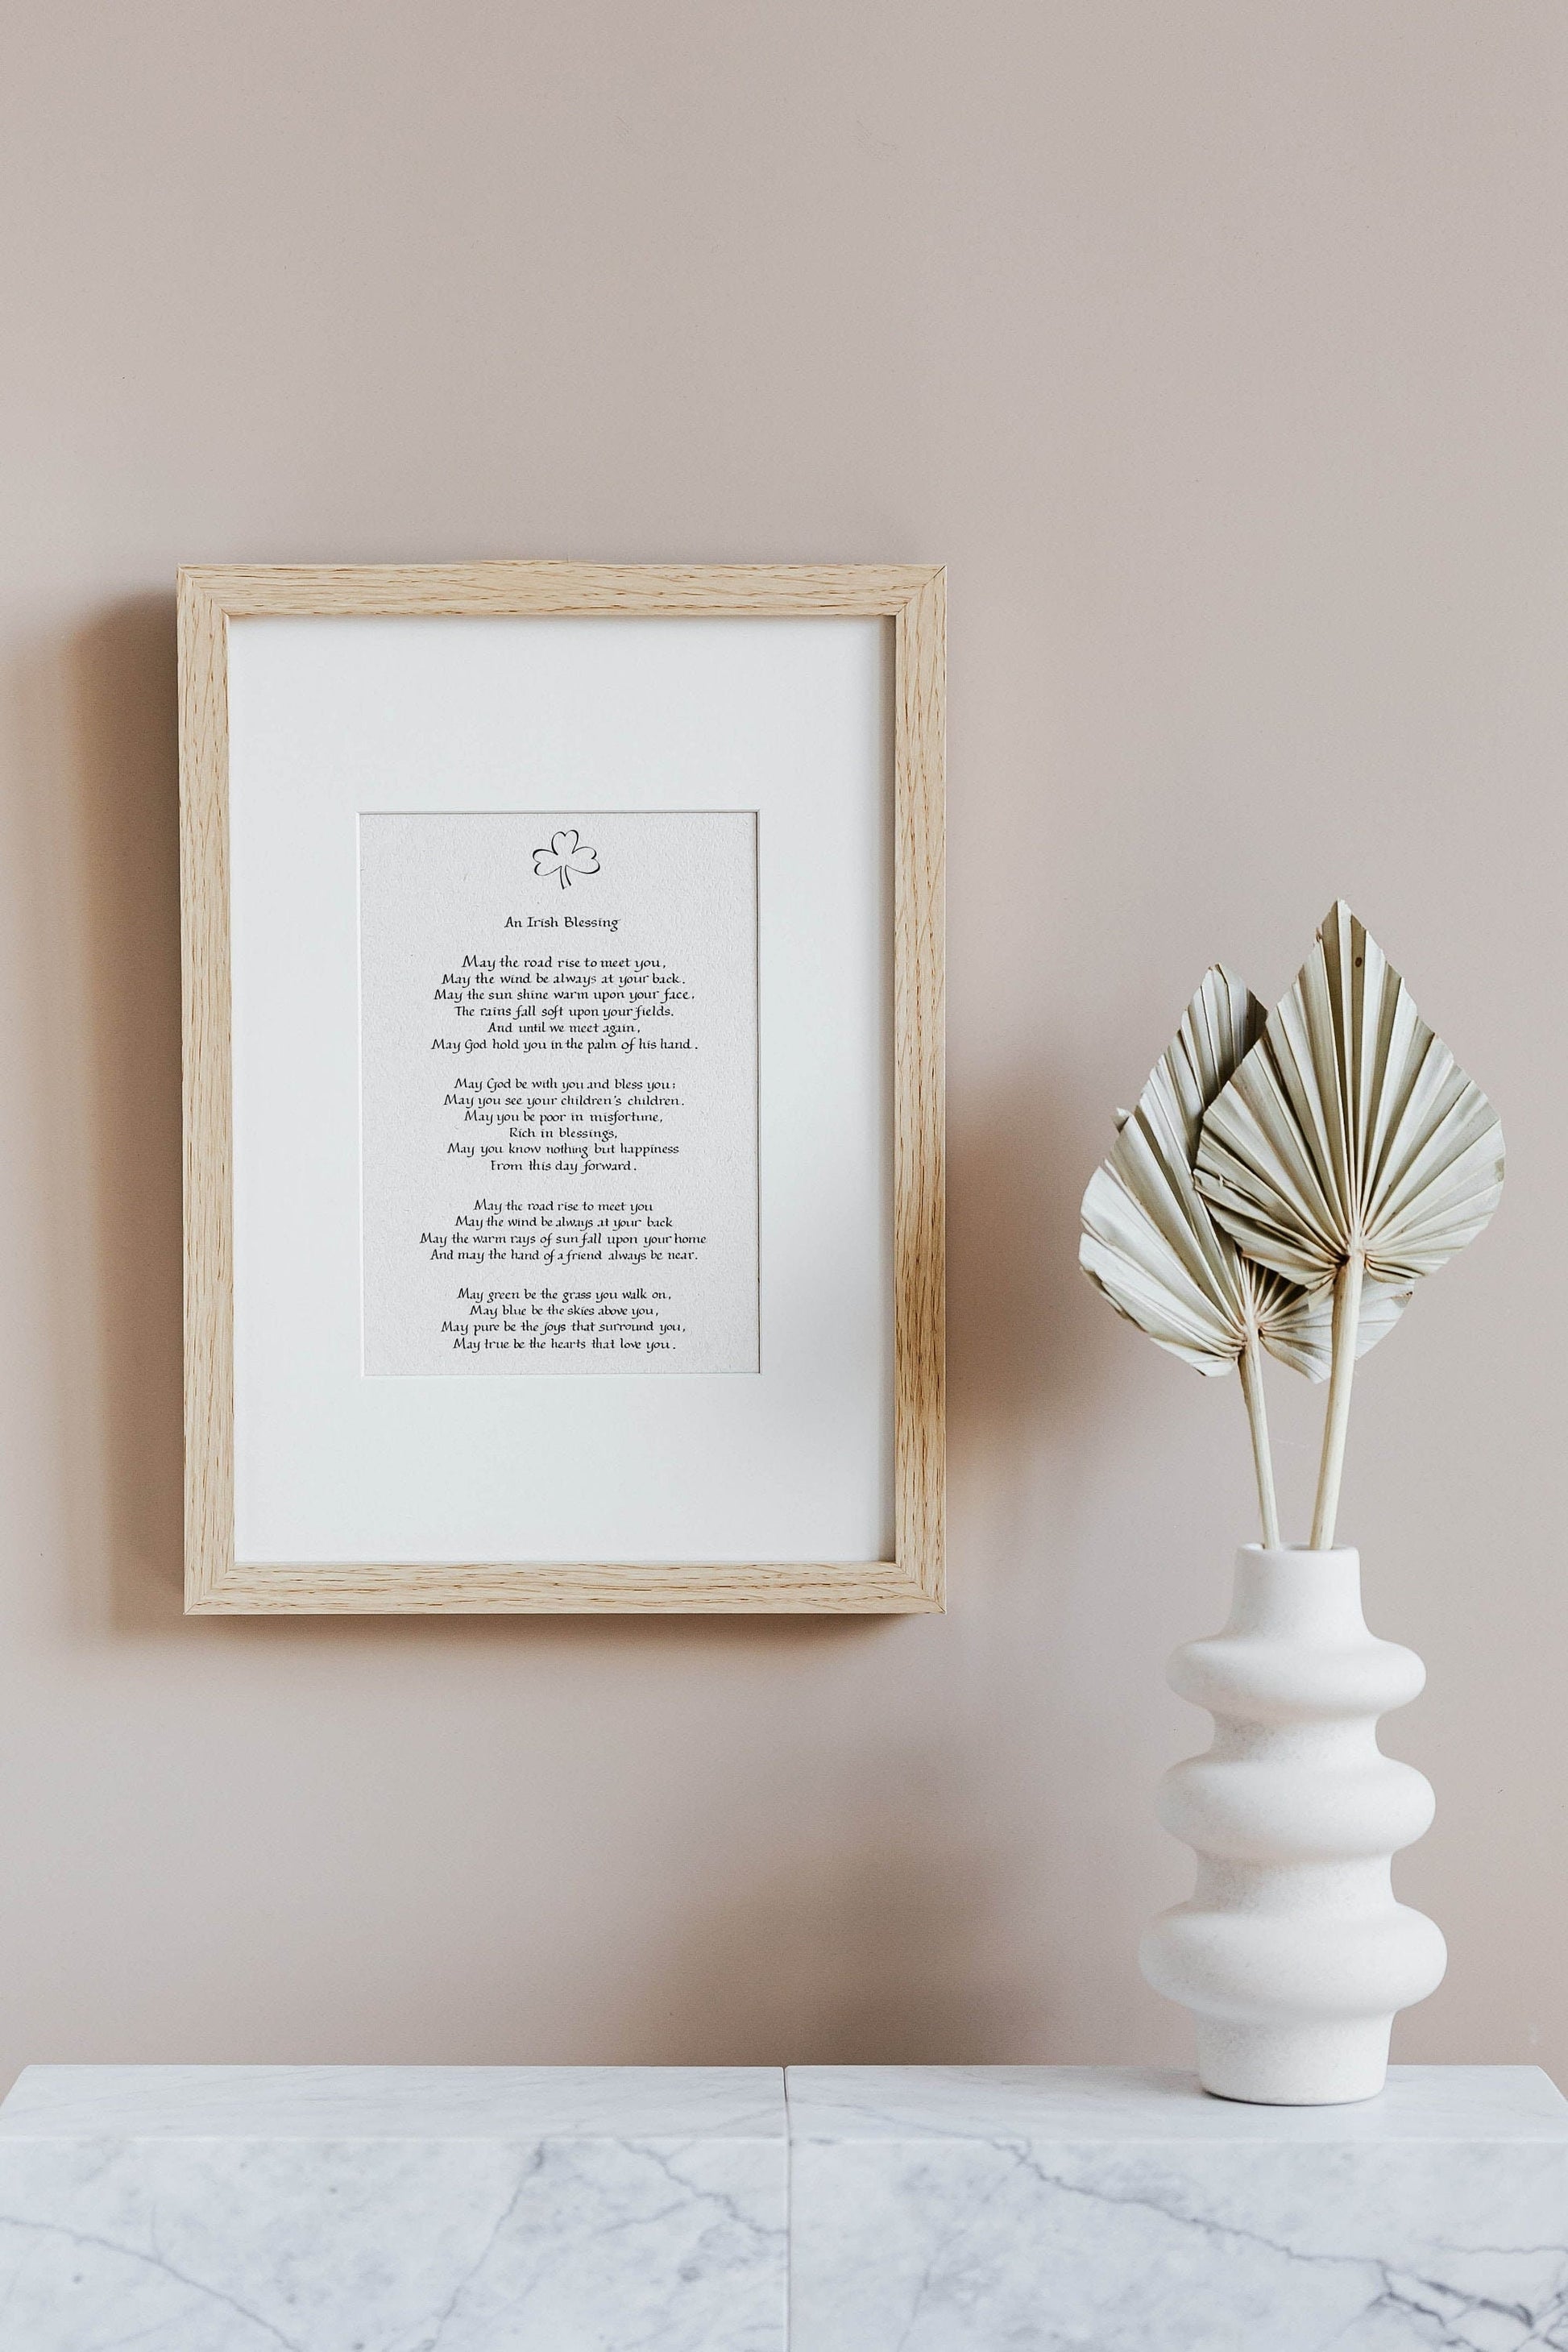 An Irish Blessing Print Framed - Calligraphy Print - Traditional Irish Gift for the Home - Framed Poster - Irish Blessing poem